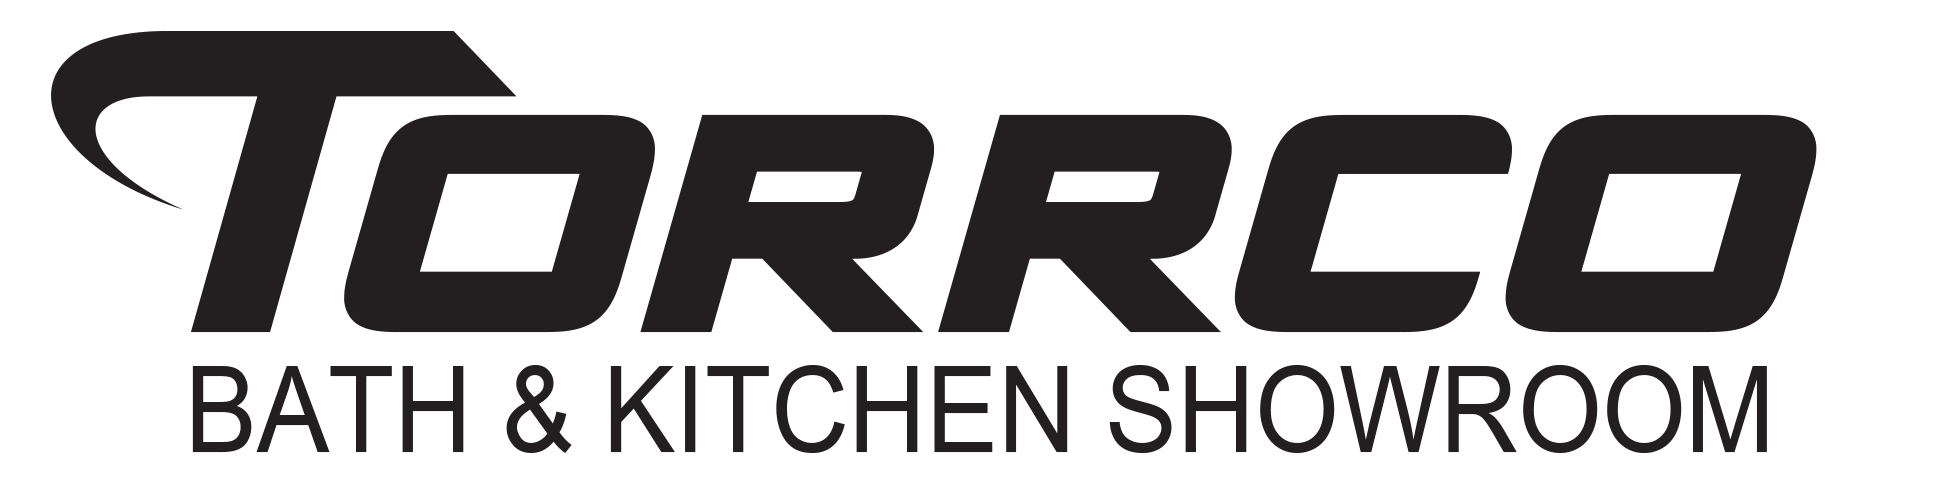 Torrco DC Bath and Kitchen Showroom Logo 2019 stacked no background